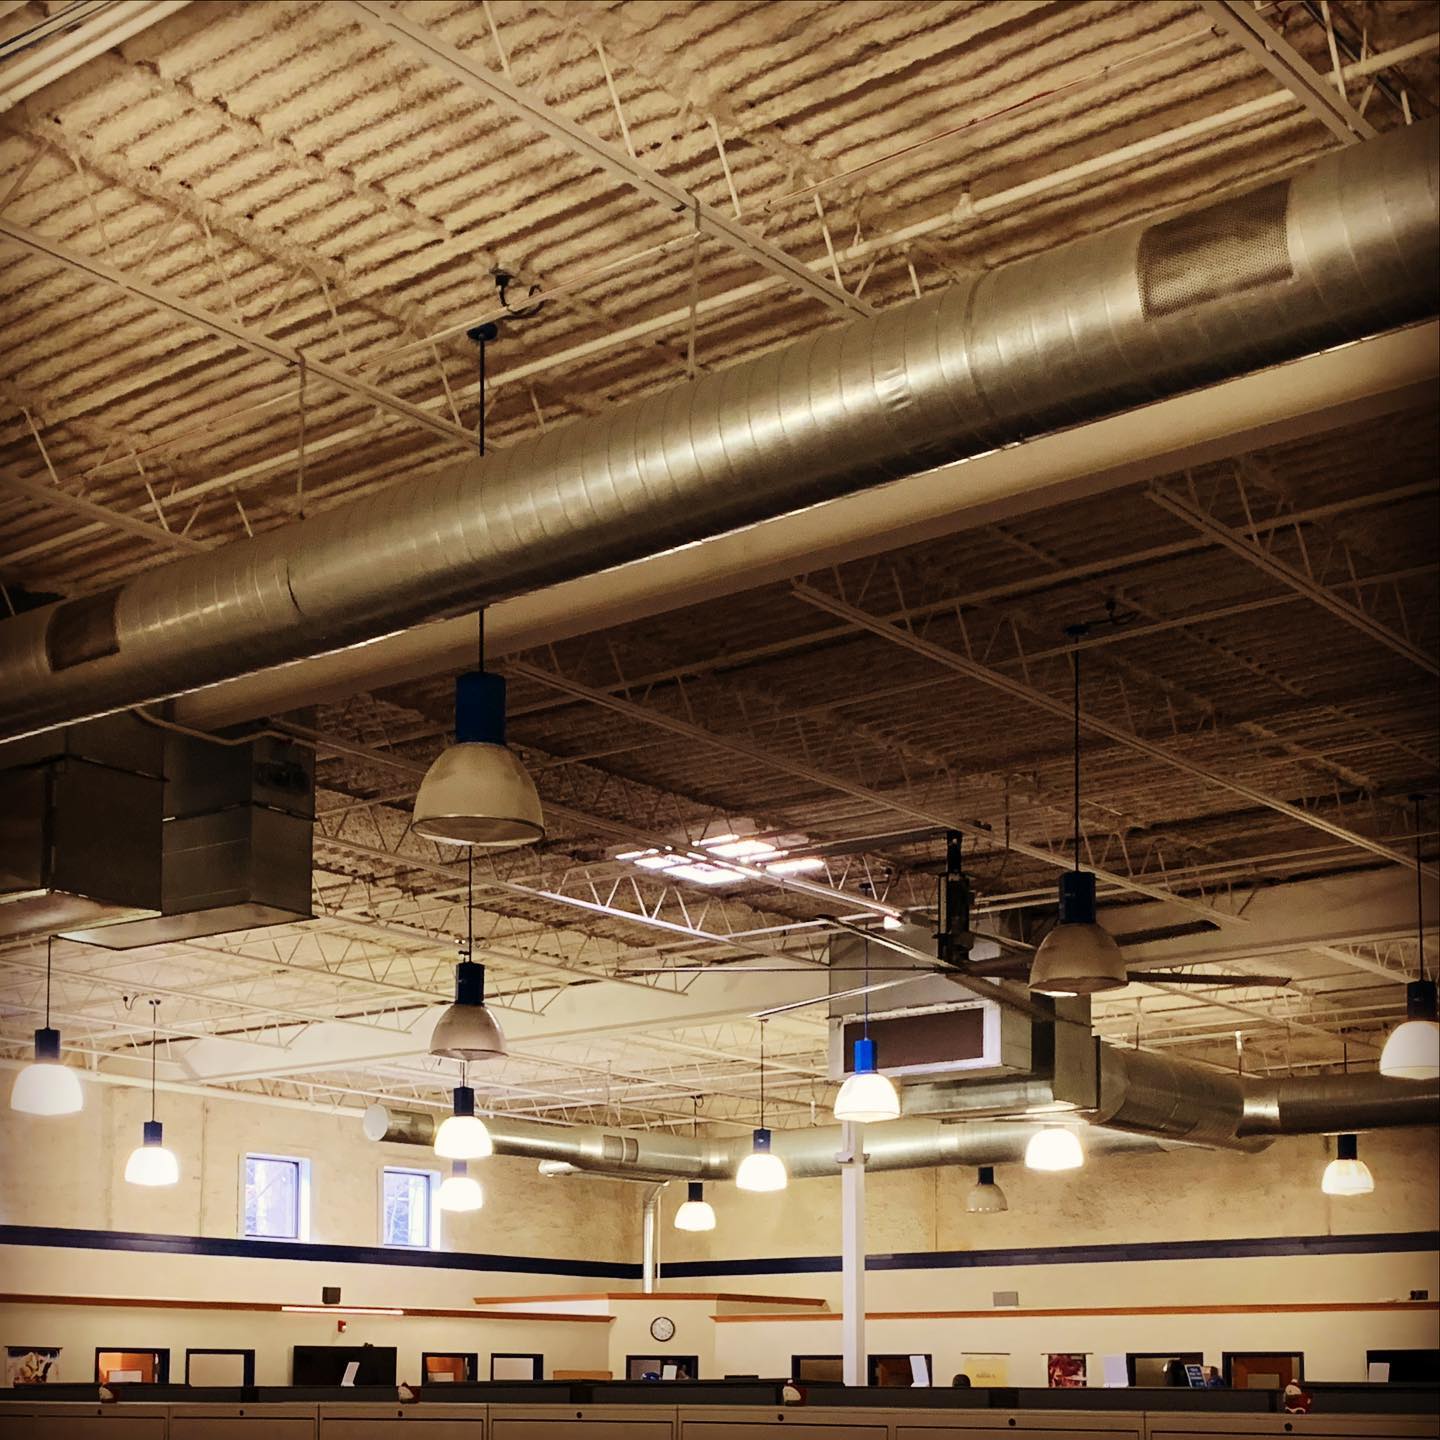 In love with this ceiling!
.
.
.
#noceilings #highceilings #exposedductwork #hvac #warehouse #loft #officedecor #officespace #virtualoffice #meetingrooms #warehouseloft #nycoffice #officespacenyc #selectofficesuites #nyc #nj